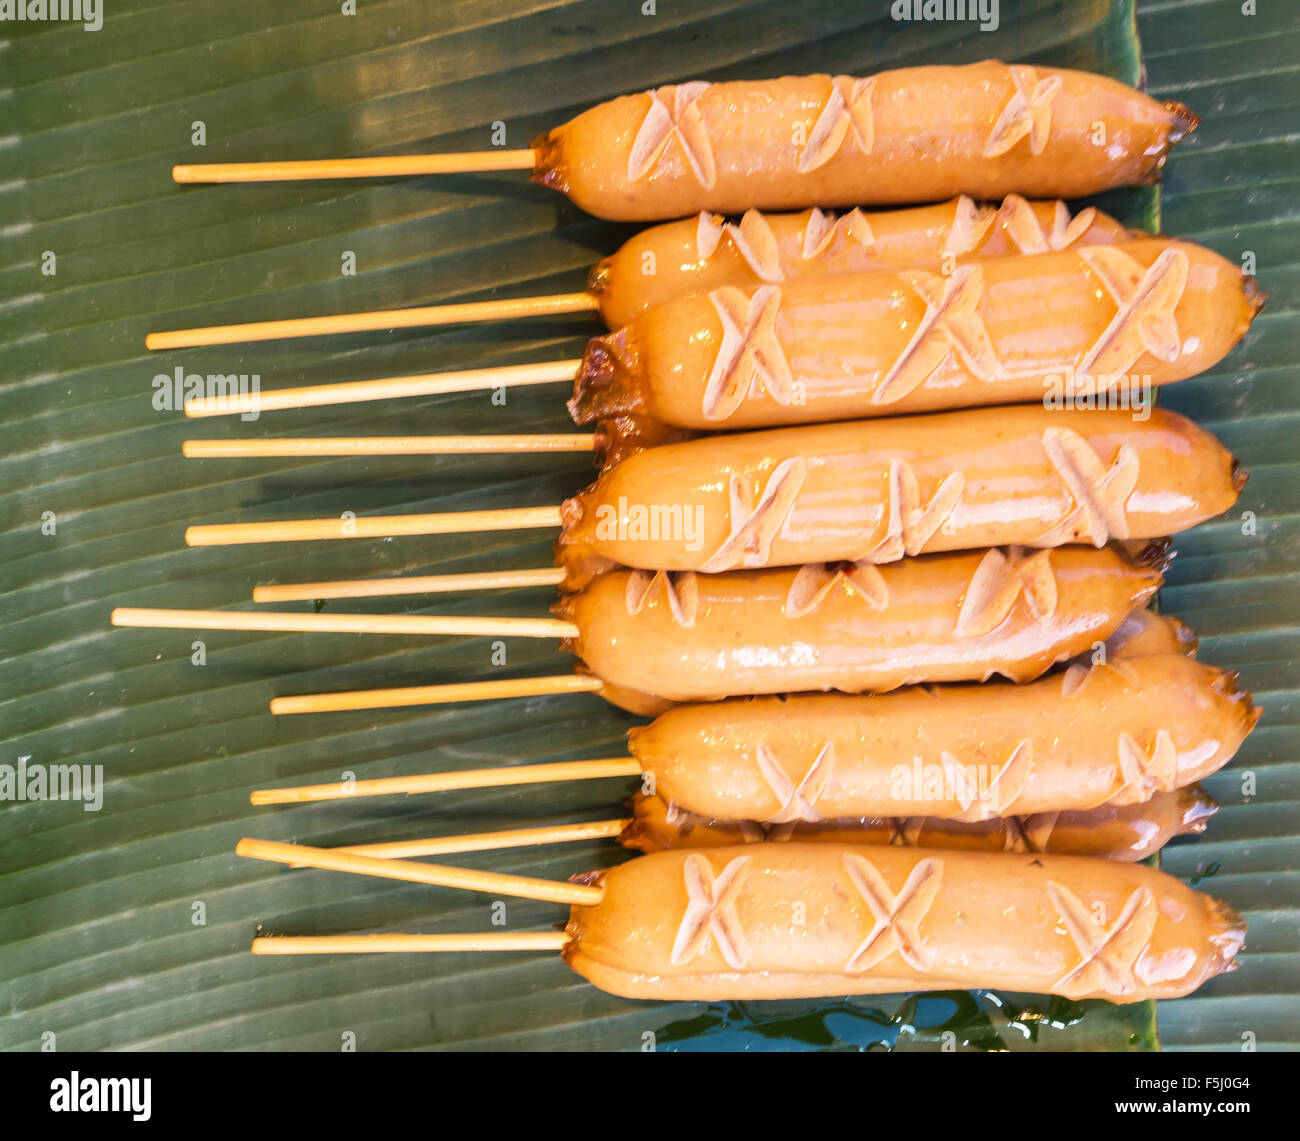 Hotdog sold in food stores at Food Festival Stock Photo